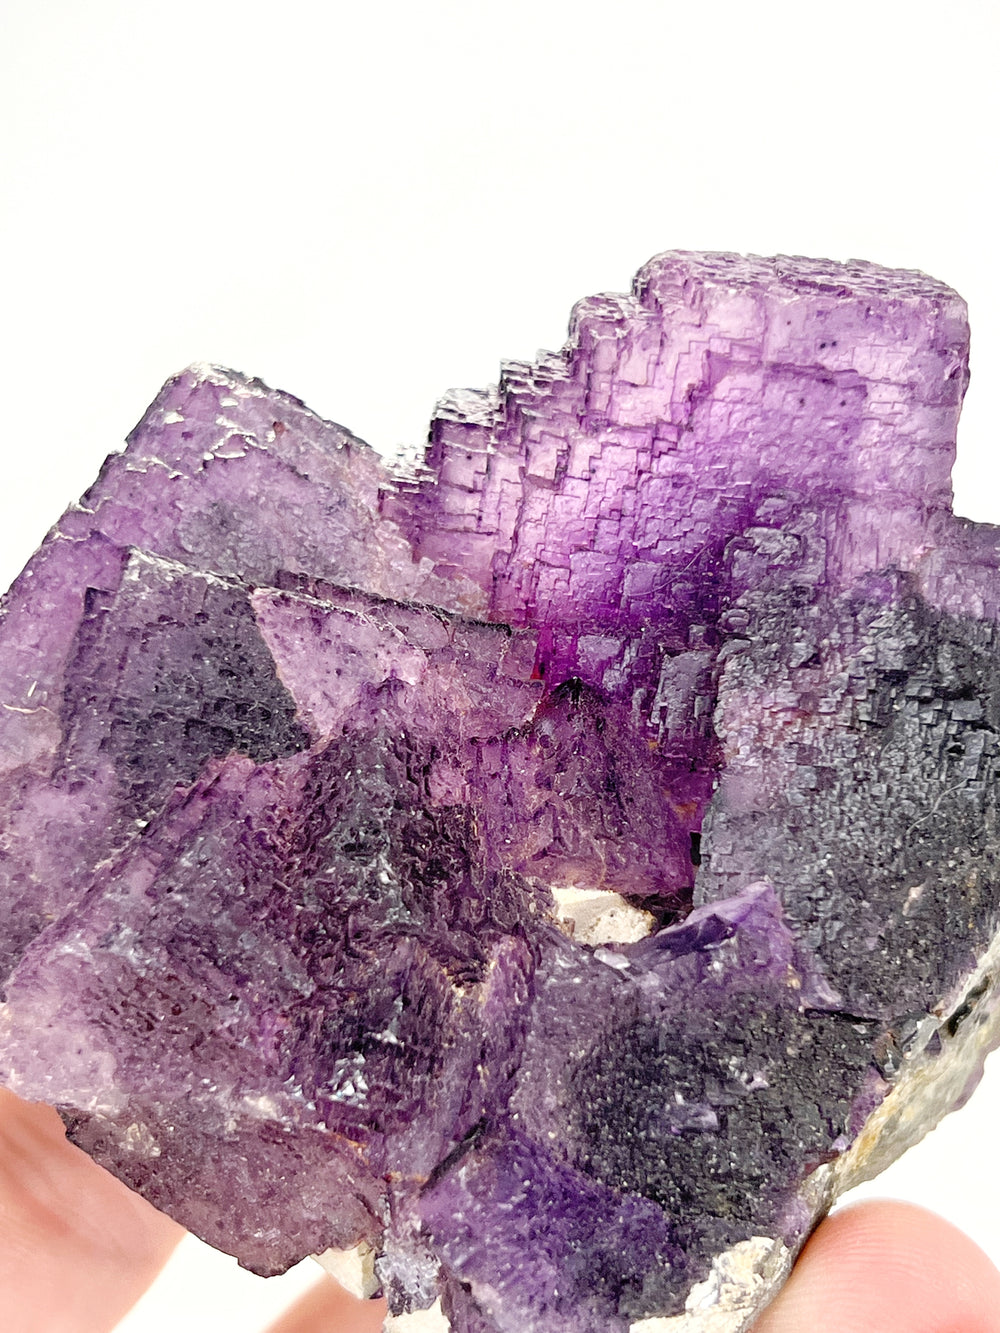 Fluorite with Galena from muzquiz Spain